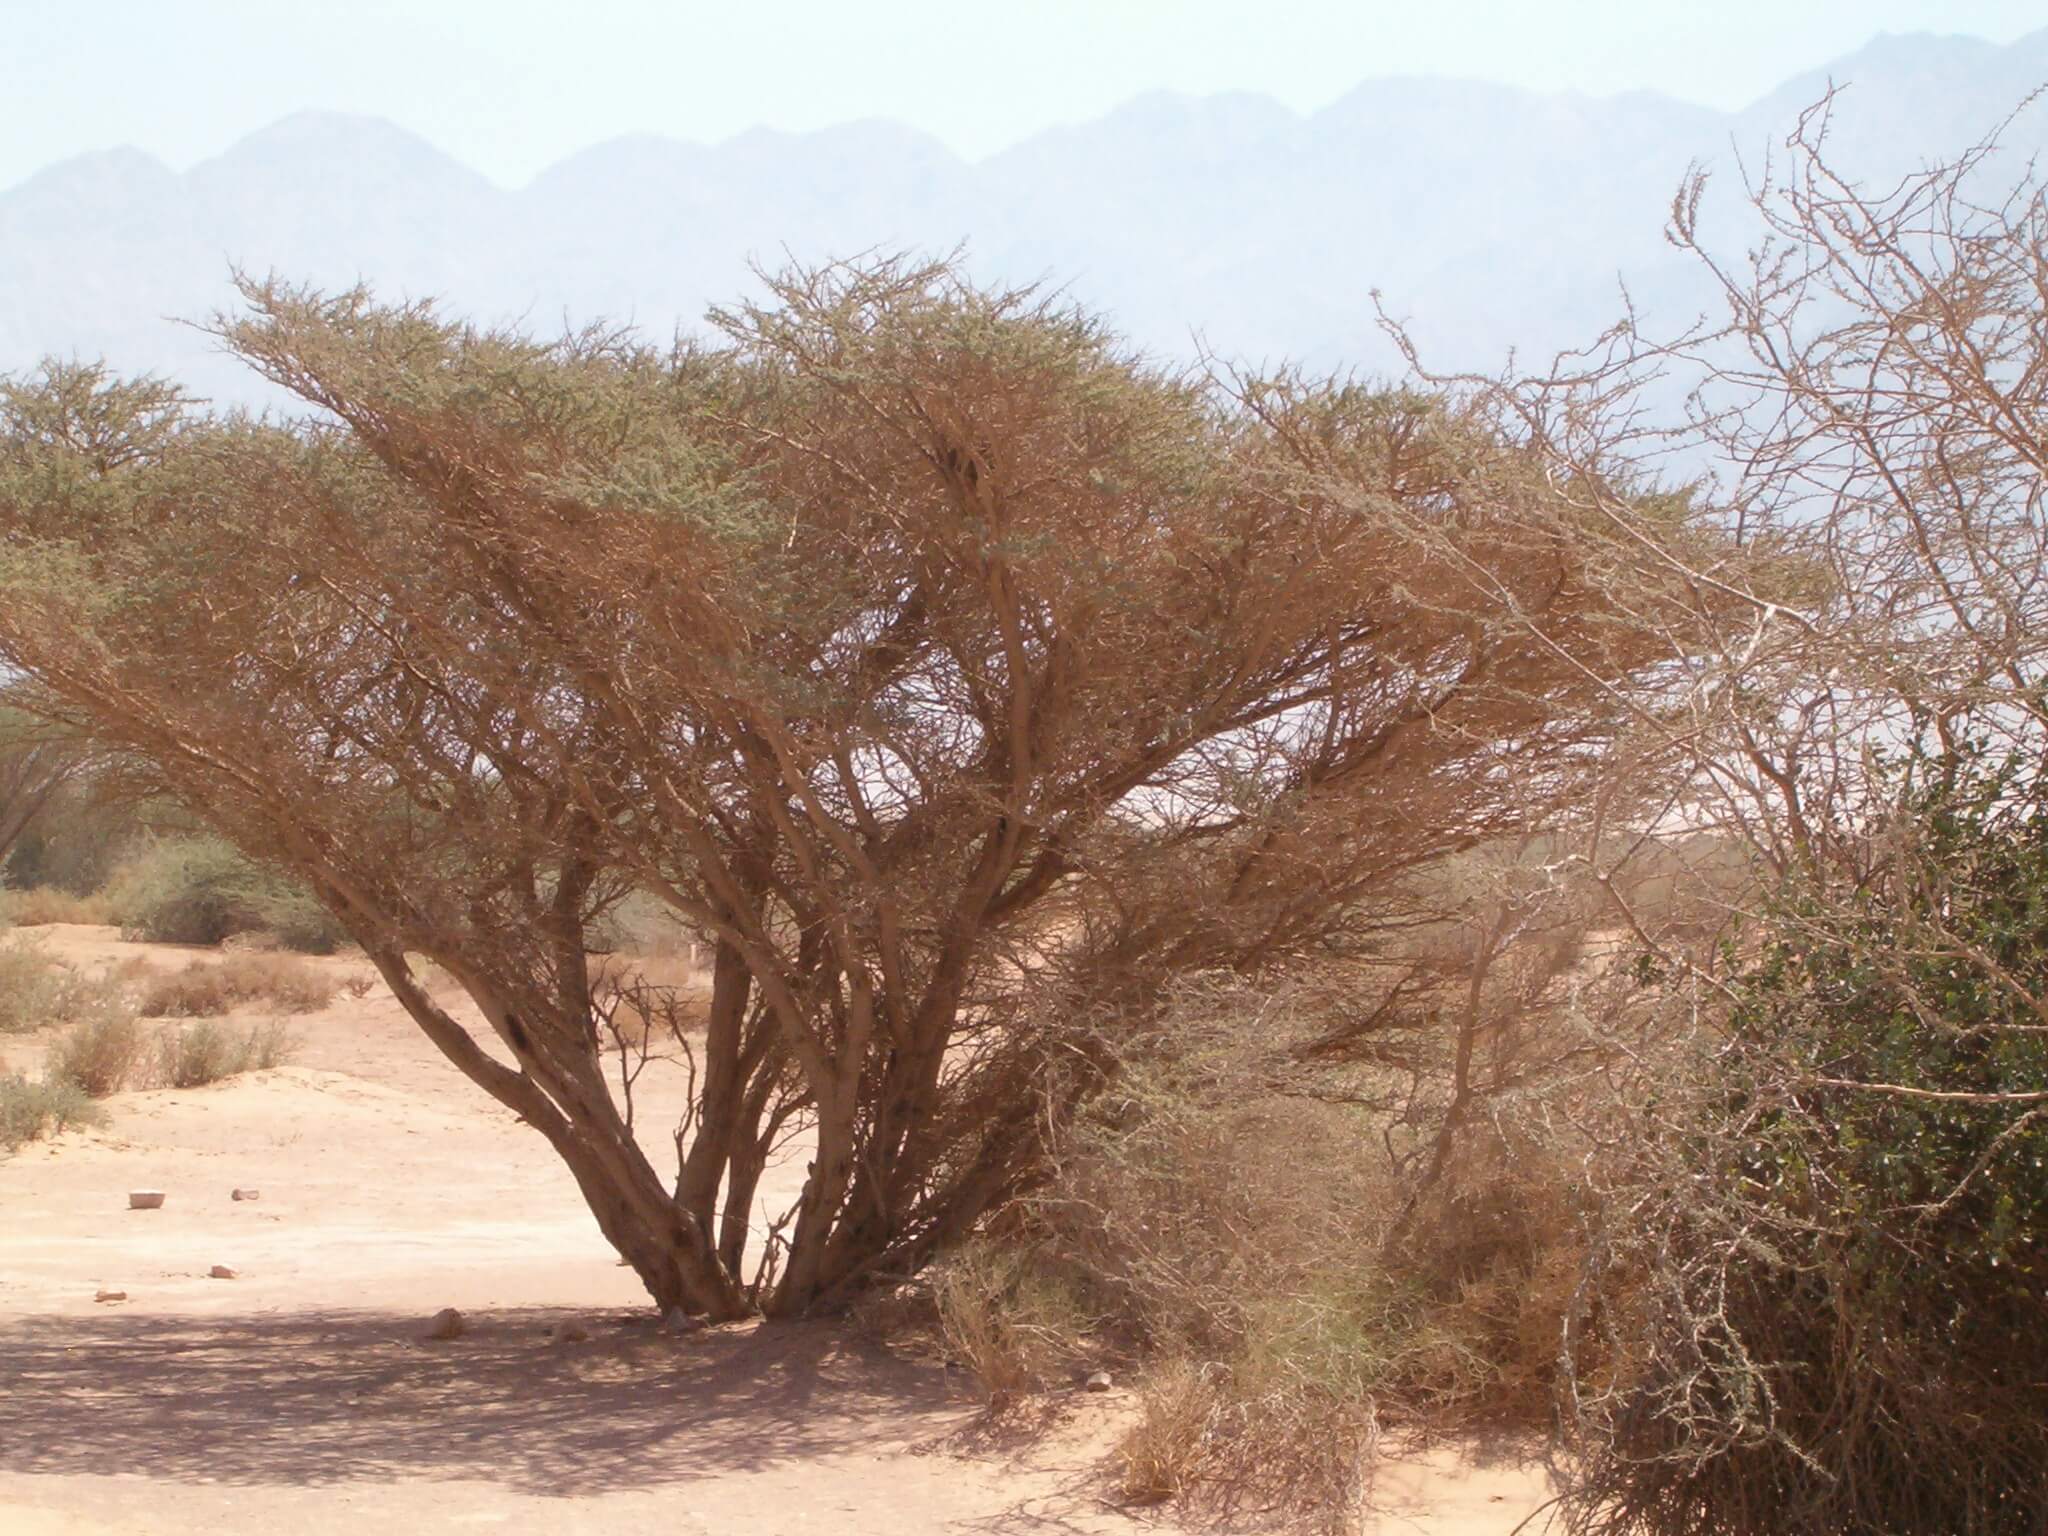 Around the acacia trees that characterize the prairie landscapes, a connection to nature is formed, the value of which is difficult to assess in economic terms. Photo: Y.S. at Hebrew Wikipedia, CC BY-SA 3.0